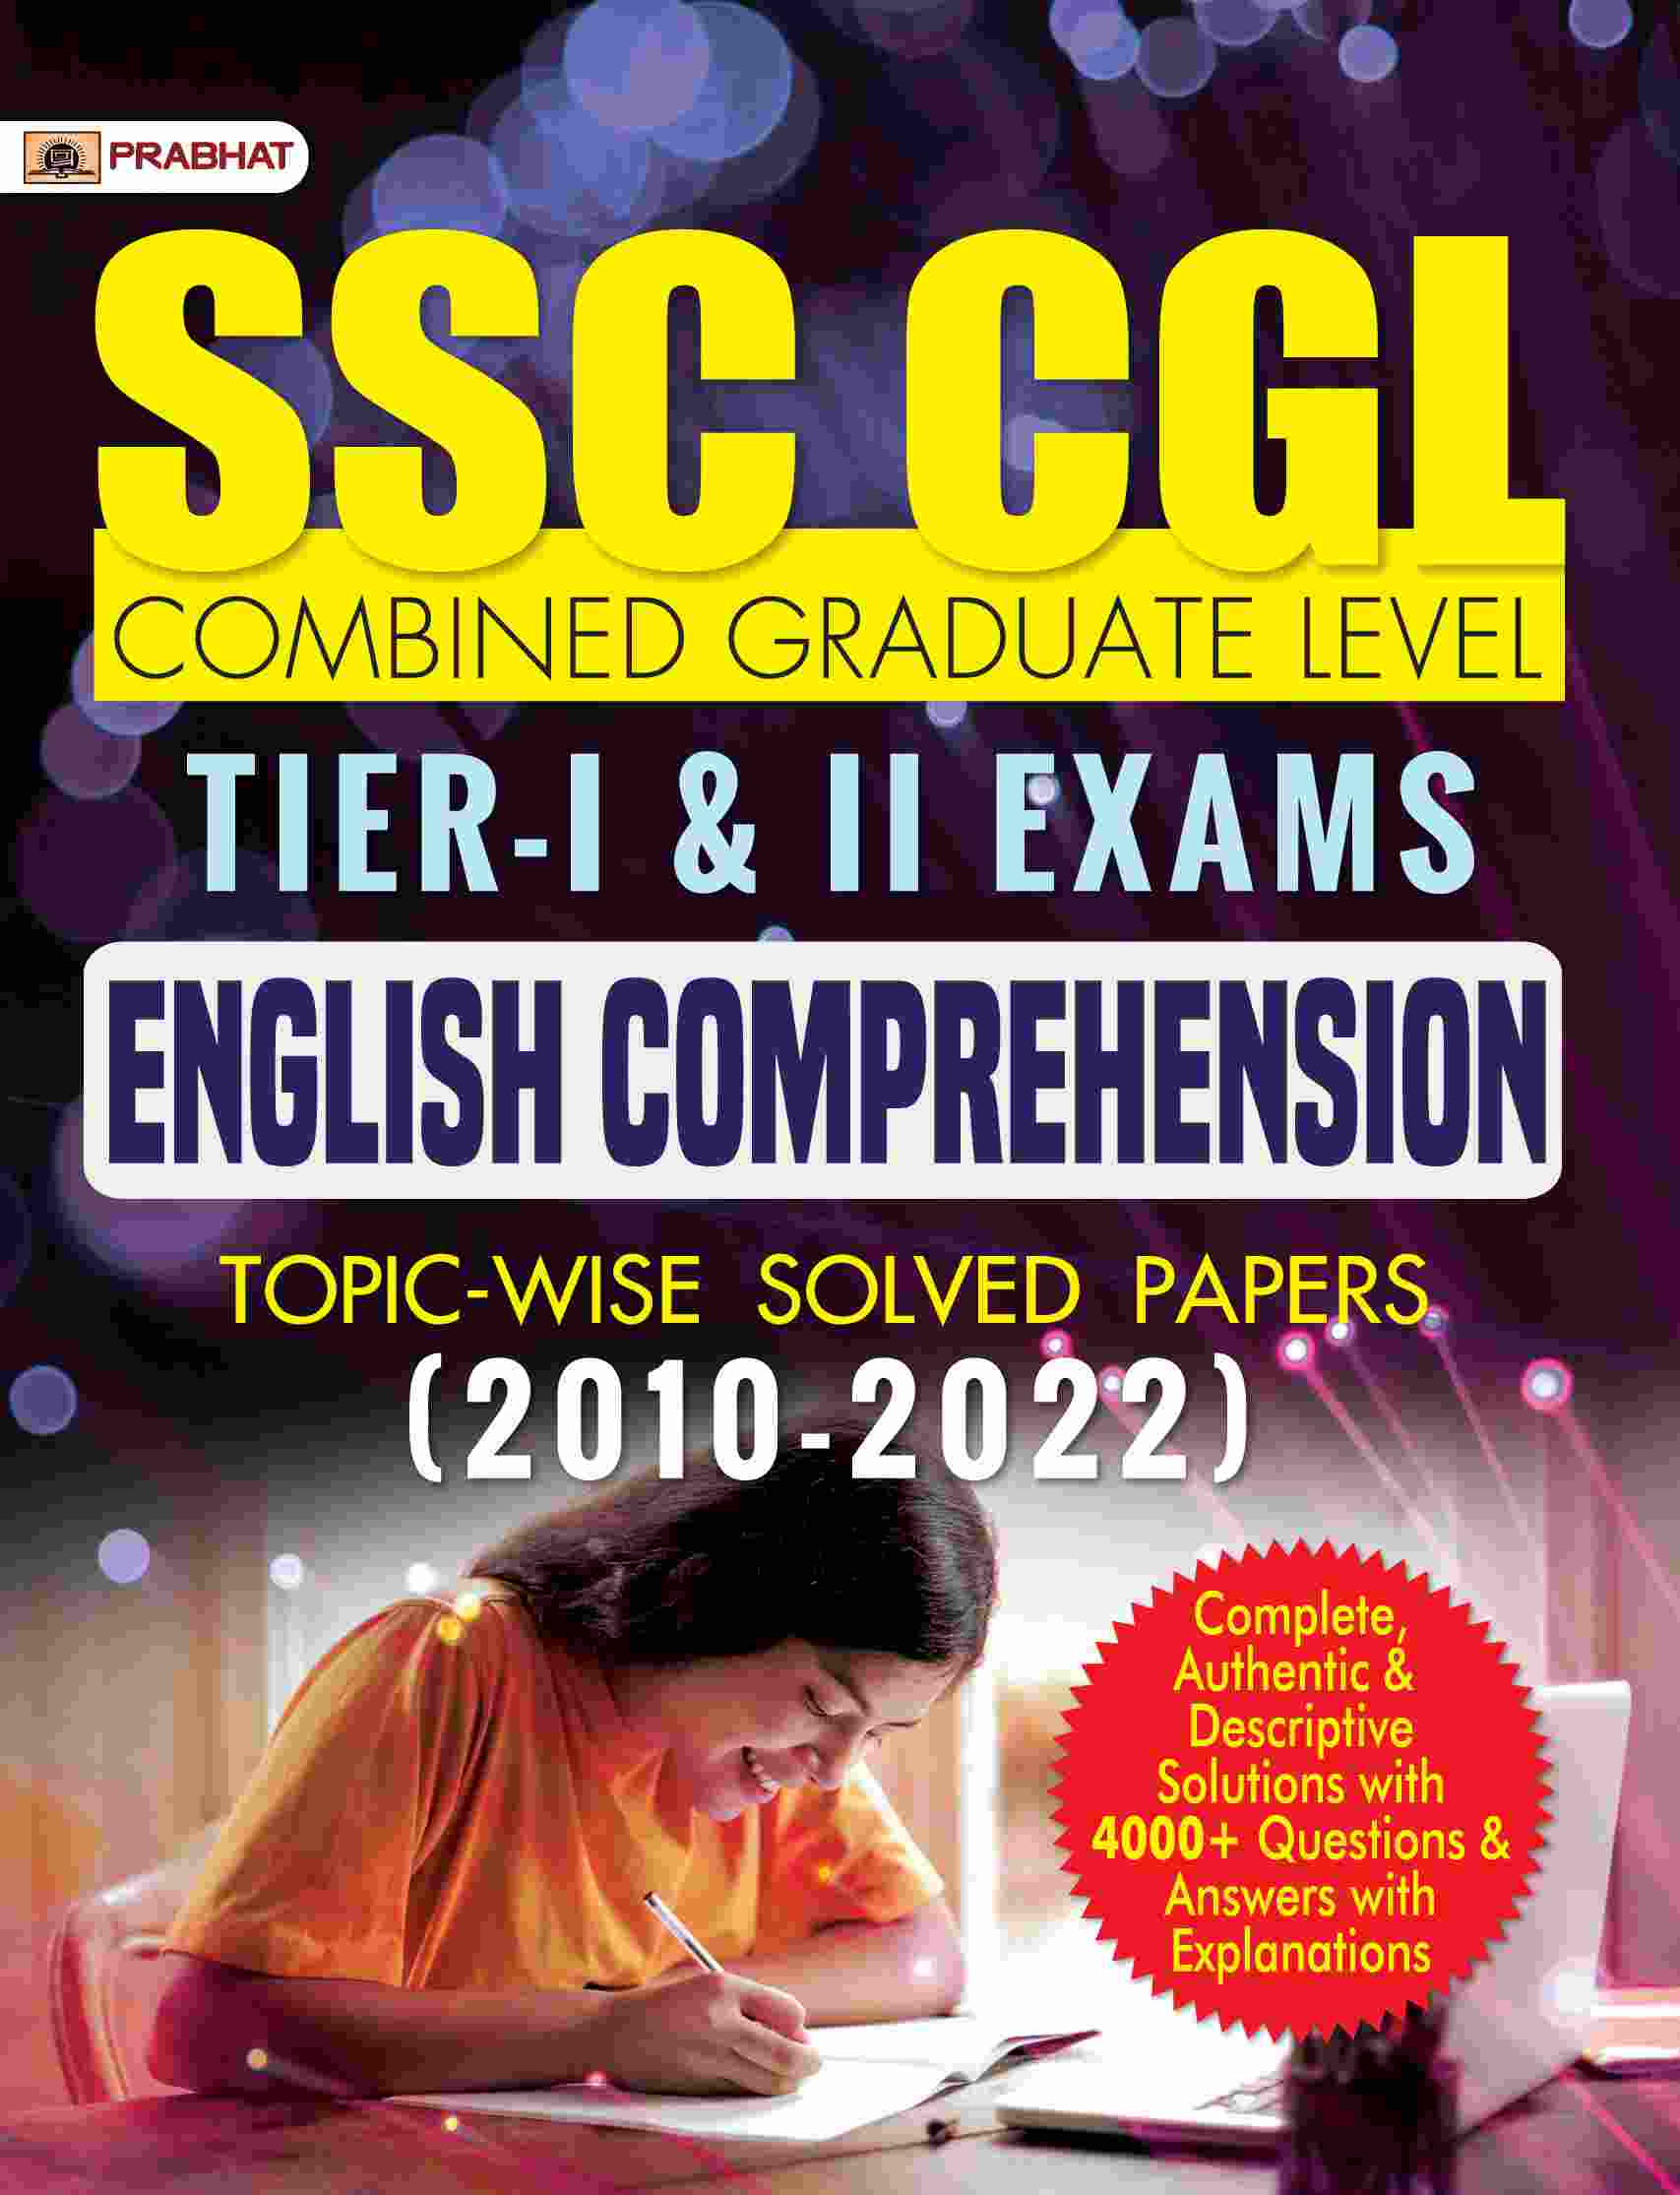 SSC-CGL Combined Graduate Level Tier-I & II Exams English Comprehension Topic–Wise Solved Papers 2010-2022